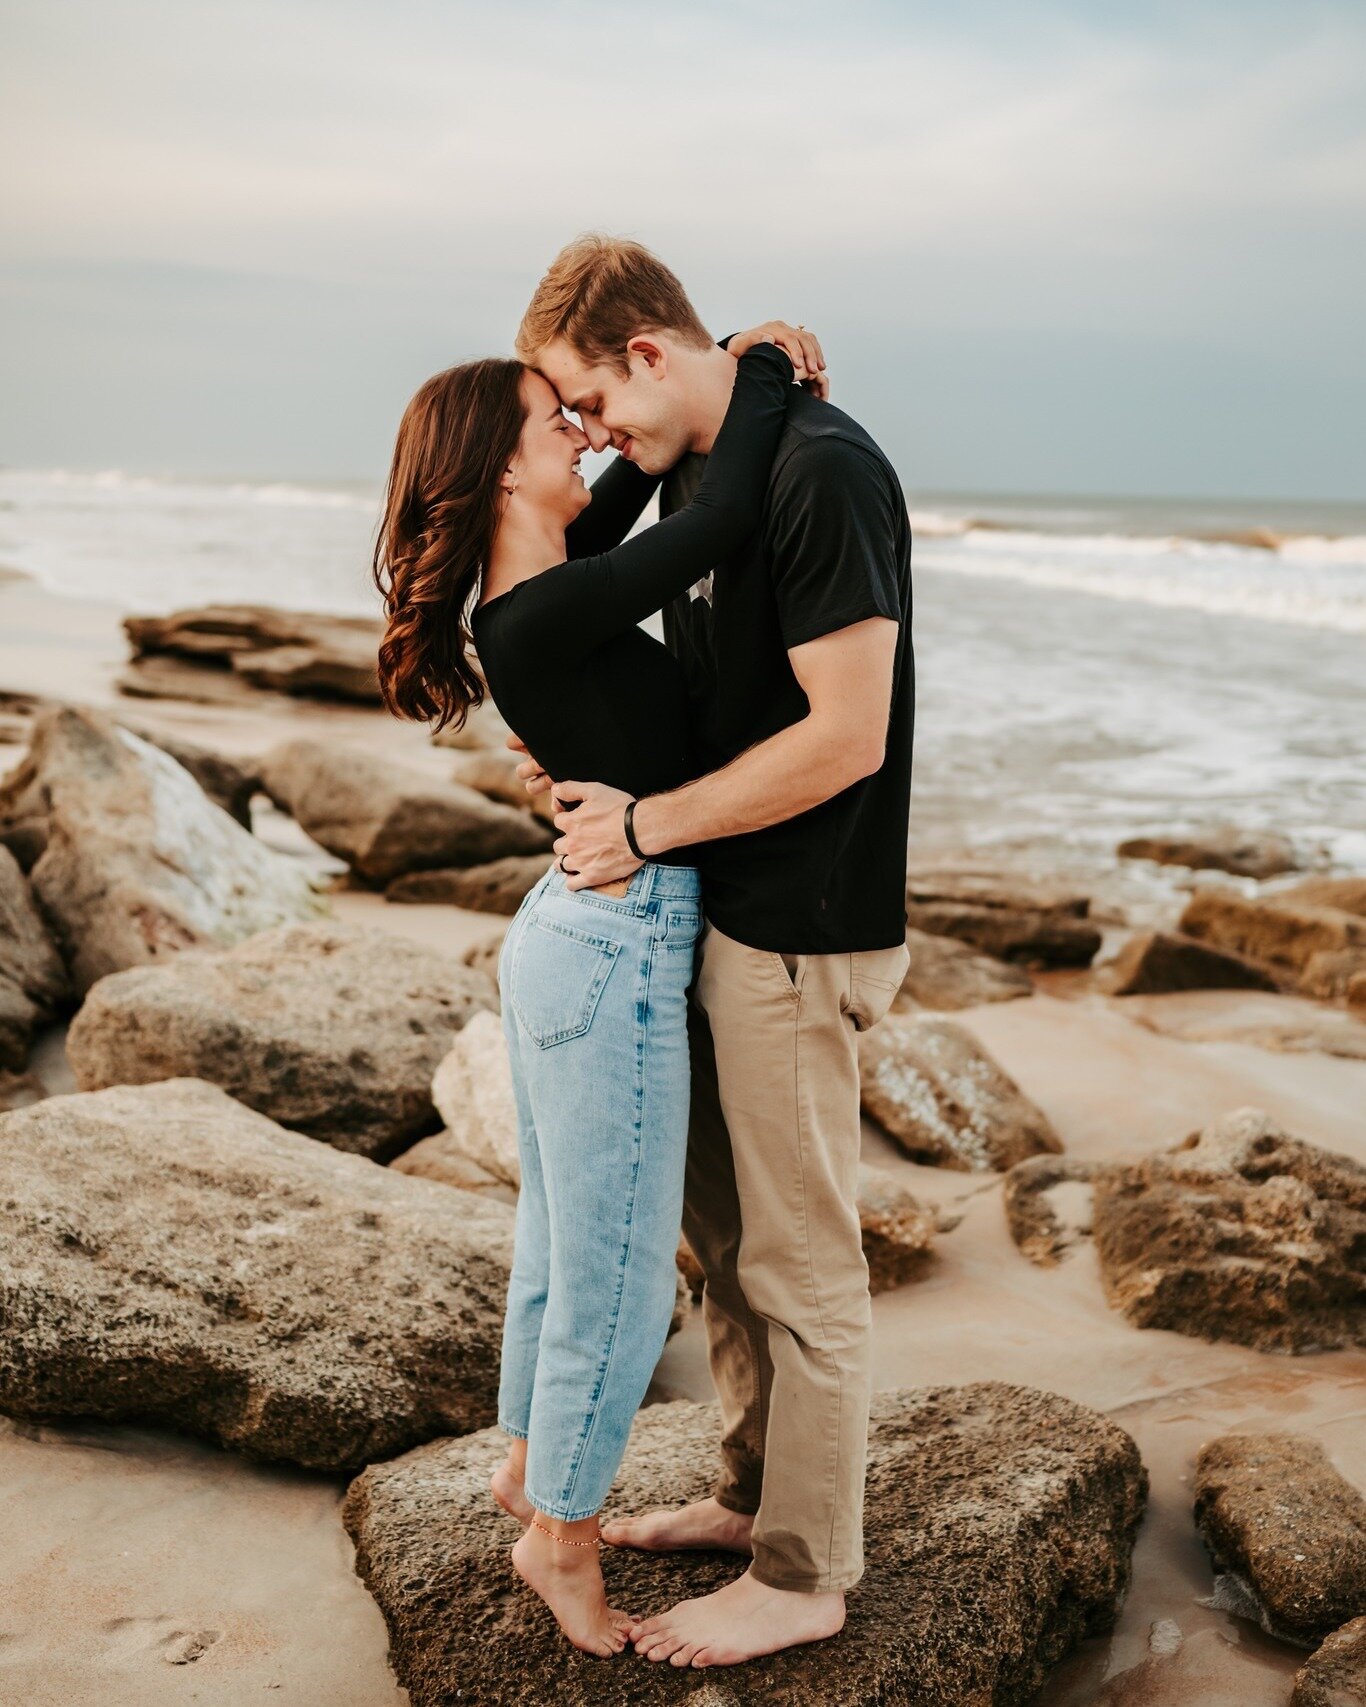 It's the tip toes for me! 😍😍😍
These two were so freakin cute together!! 

#staugustinelife #captureyourmoments #staugustinephotoshoot #staugustinebeach #staugustinebeachphotographer #staugustinecouplesphotos #staugustinephotography #coupleslove #c